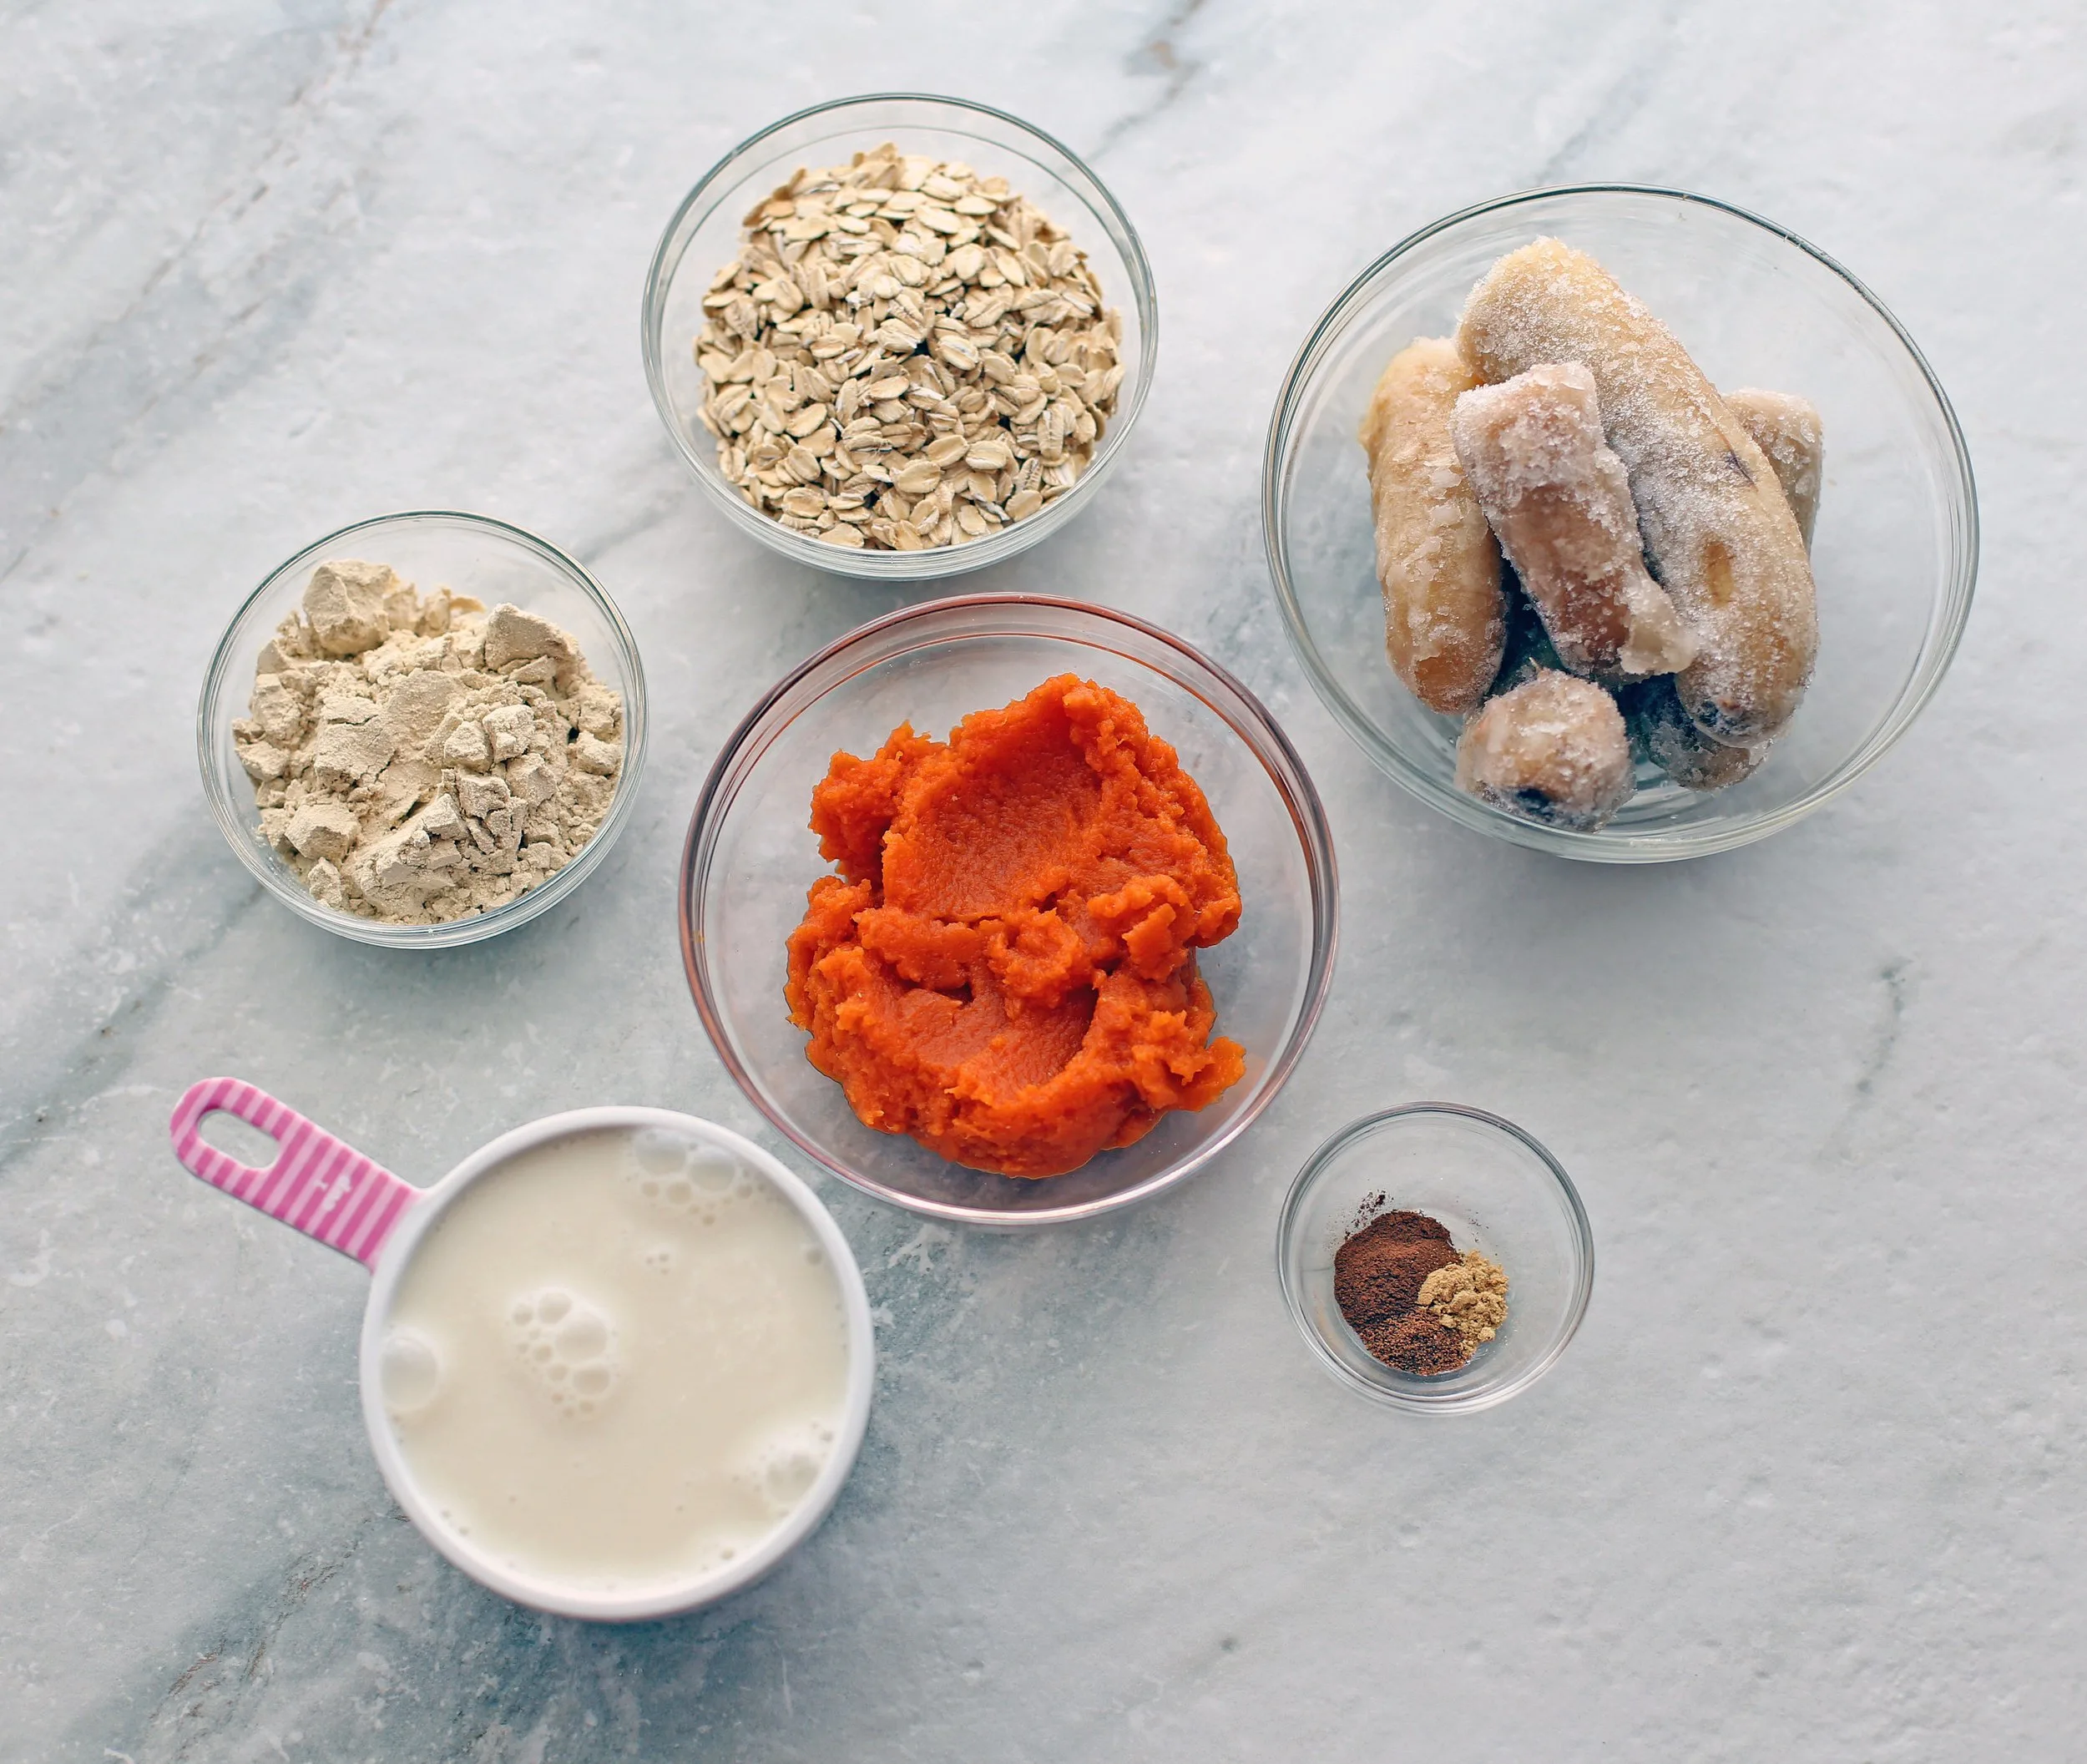 Overhead view of almond milk, pumpkin puree, frozen banana, spices, protein powder, and oatmeal.